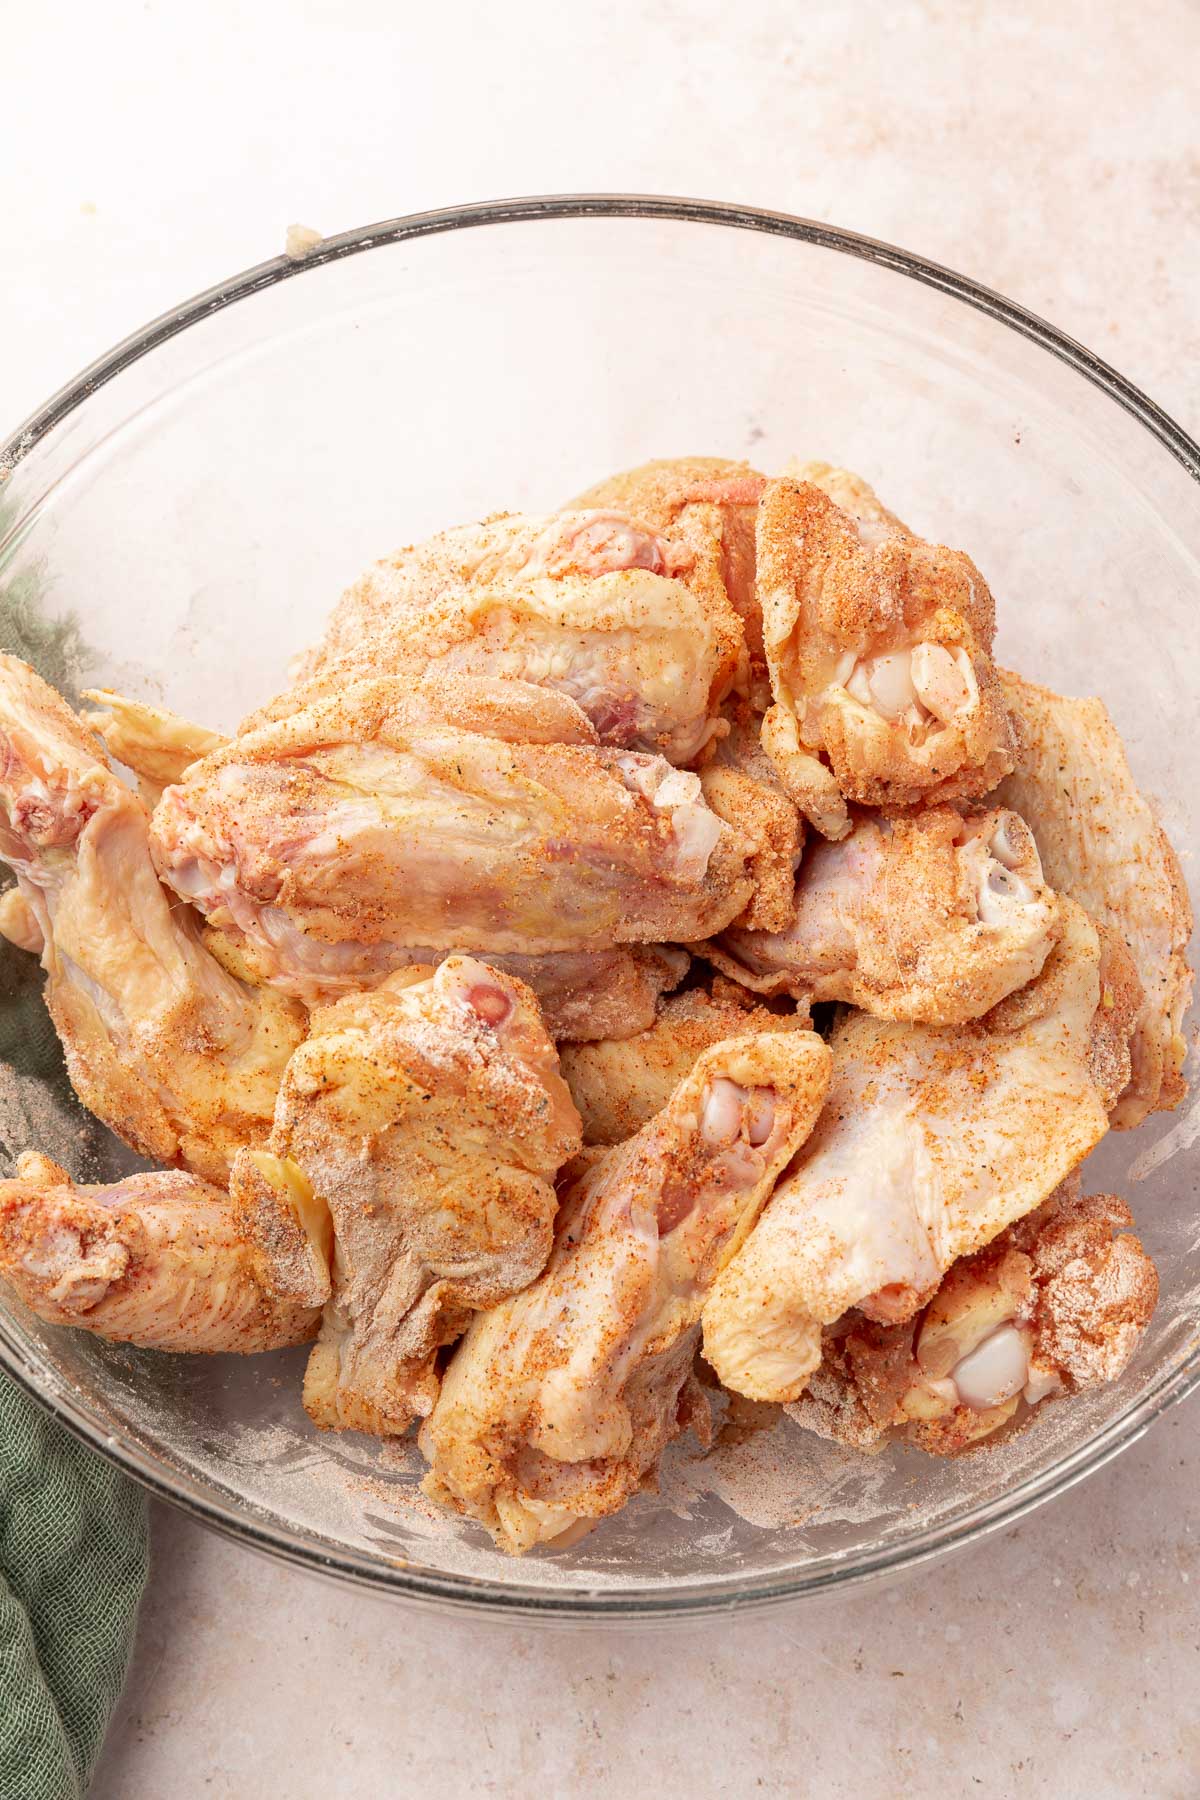 A glass mixing bowl with raw chicken wings tossed in baking pwoder and spices.